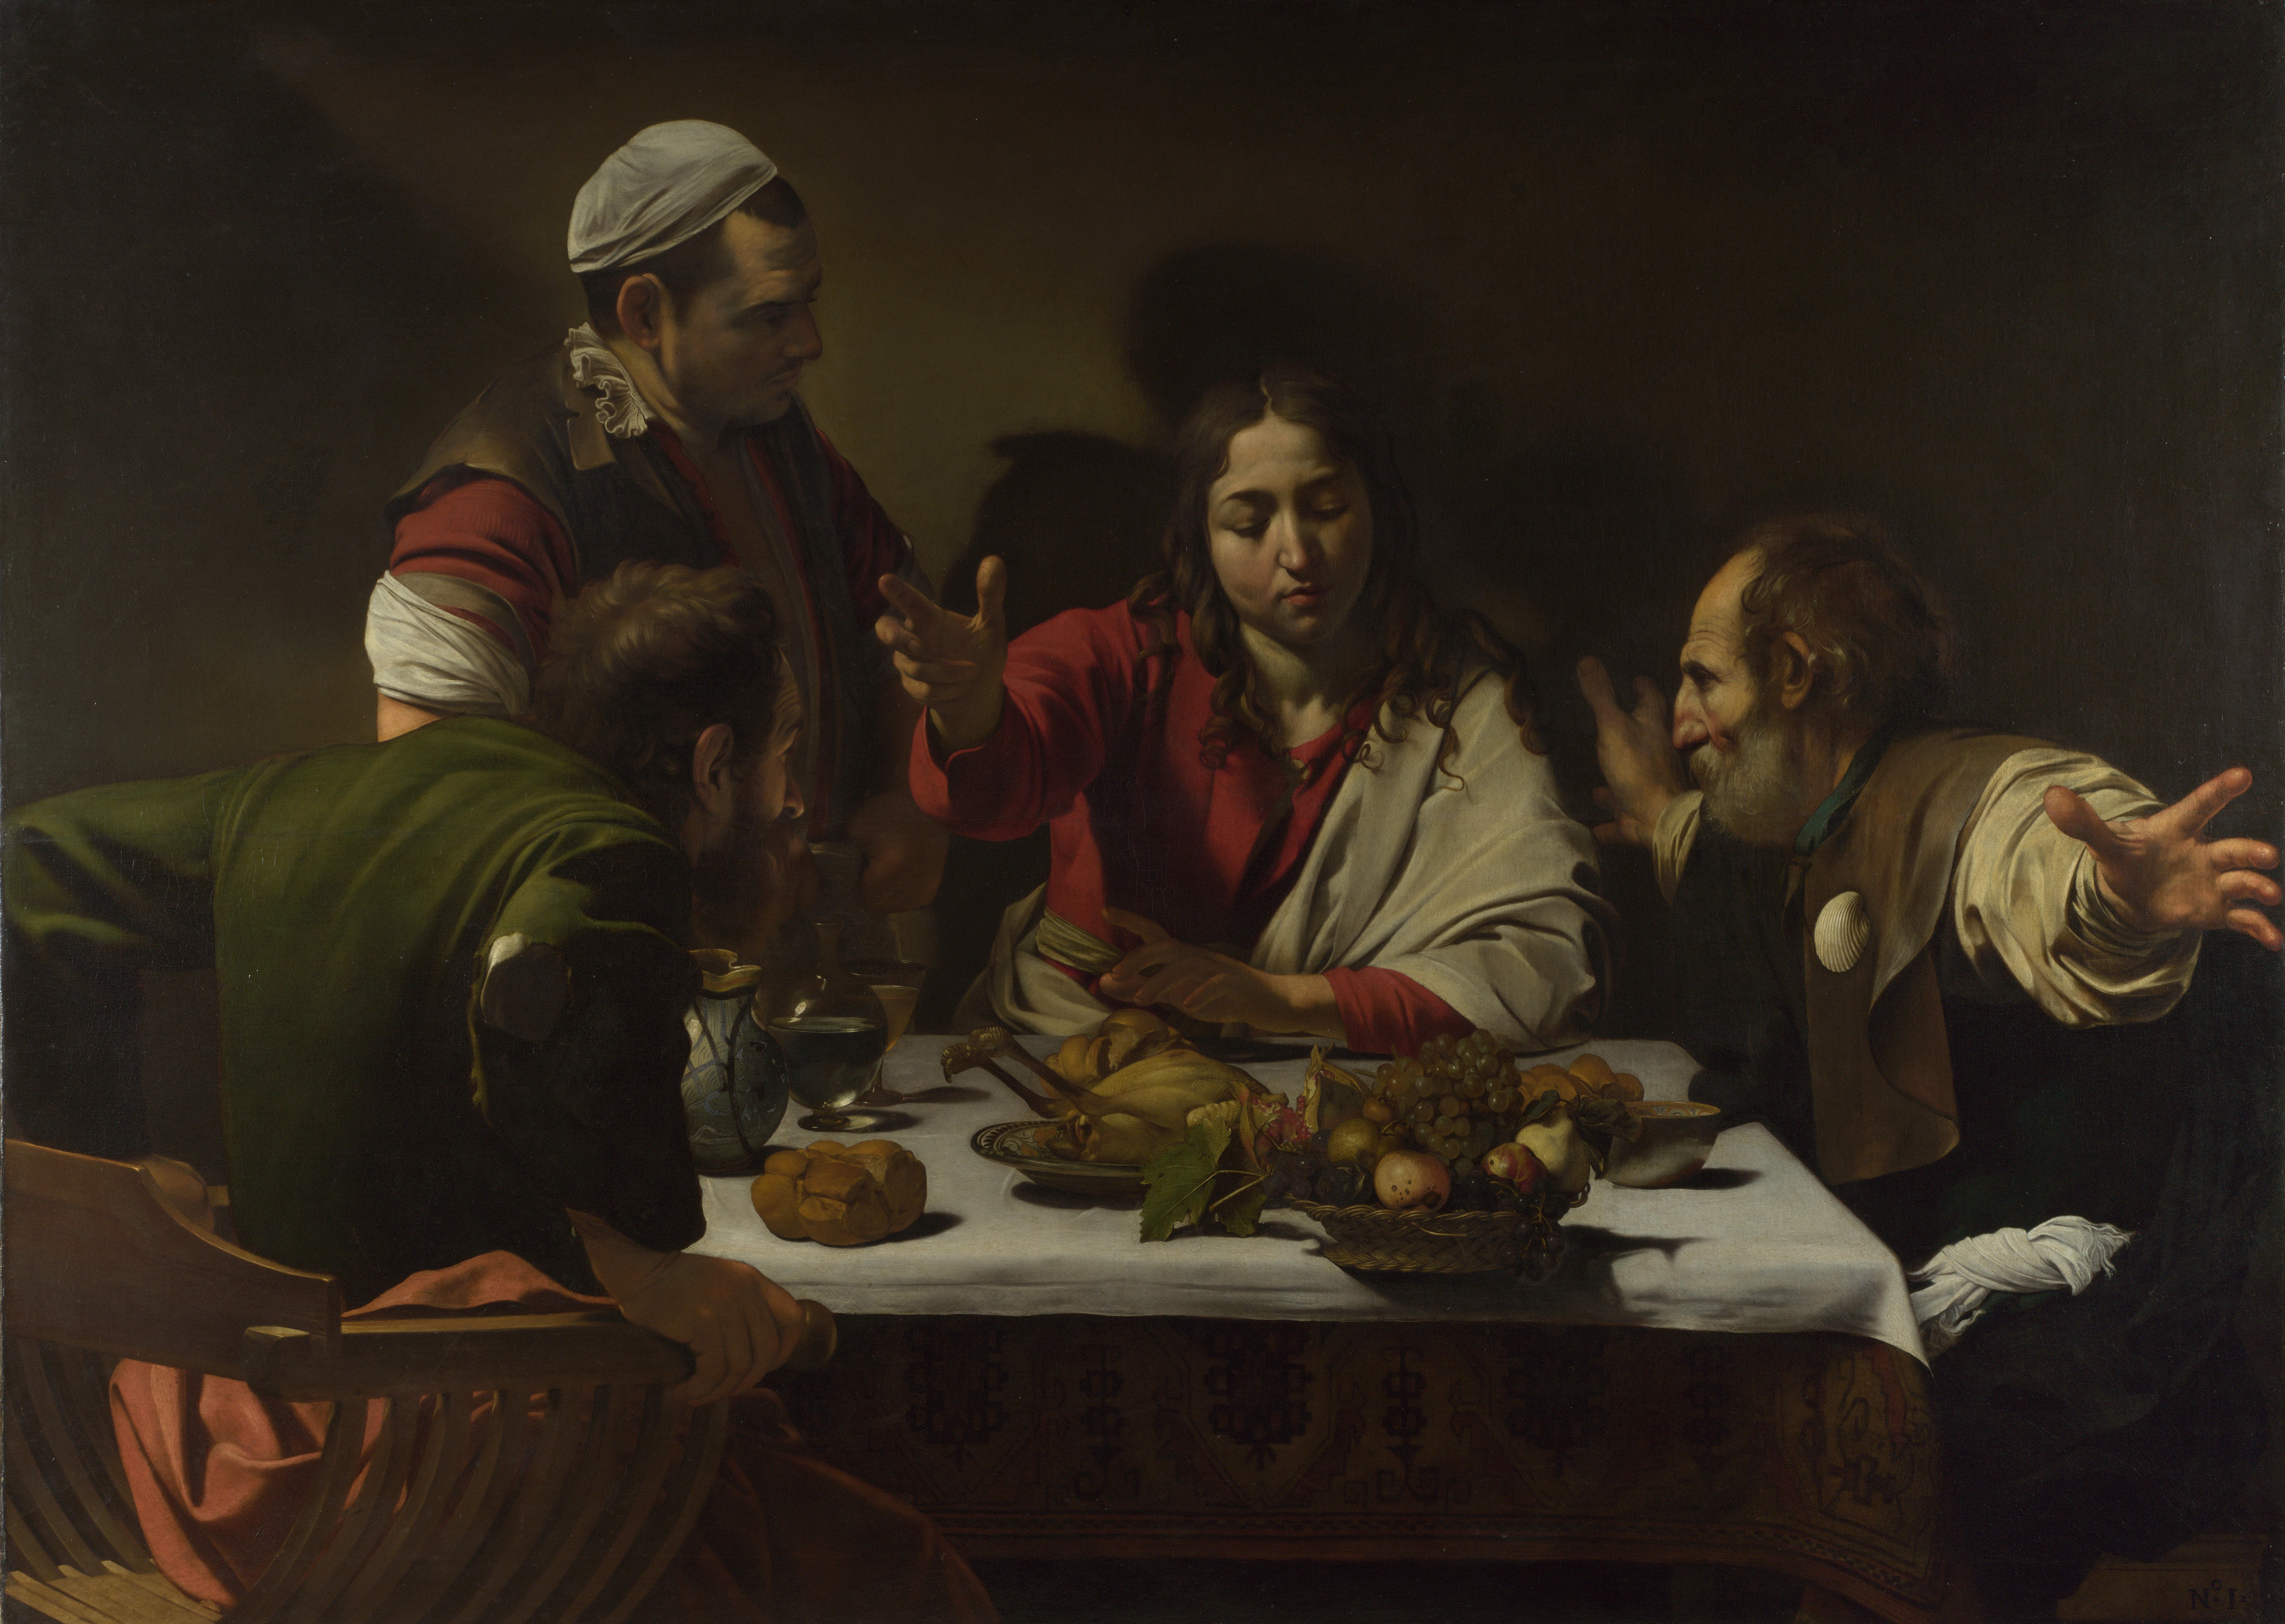 The Supper at Emmaus by Caravaggio